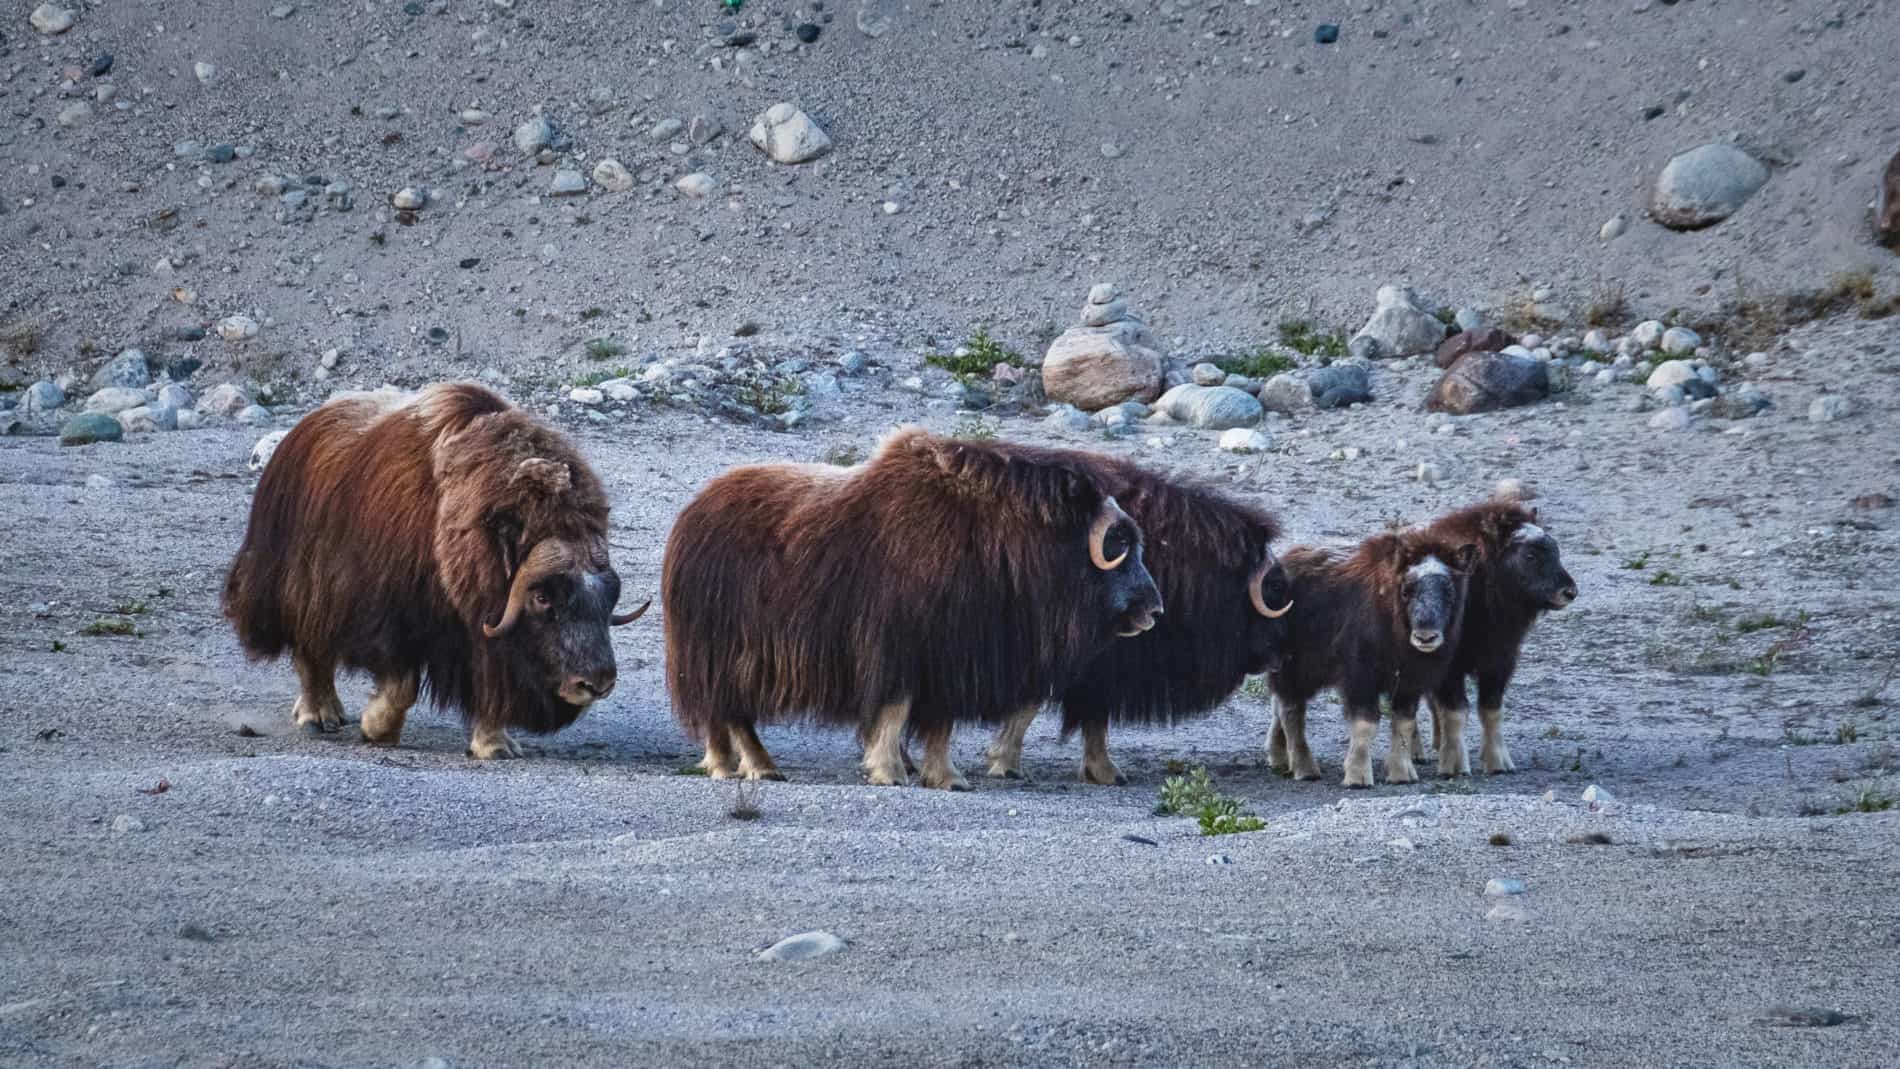 A musk ox family. Kangerlussuaq is the best place in Greenland to see Musk Oxen on a wildlife safari